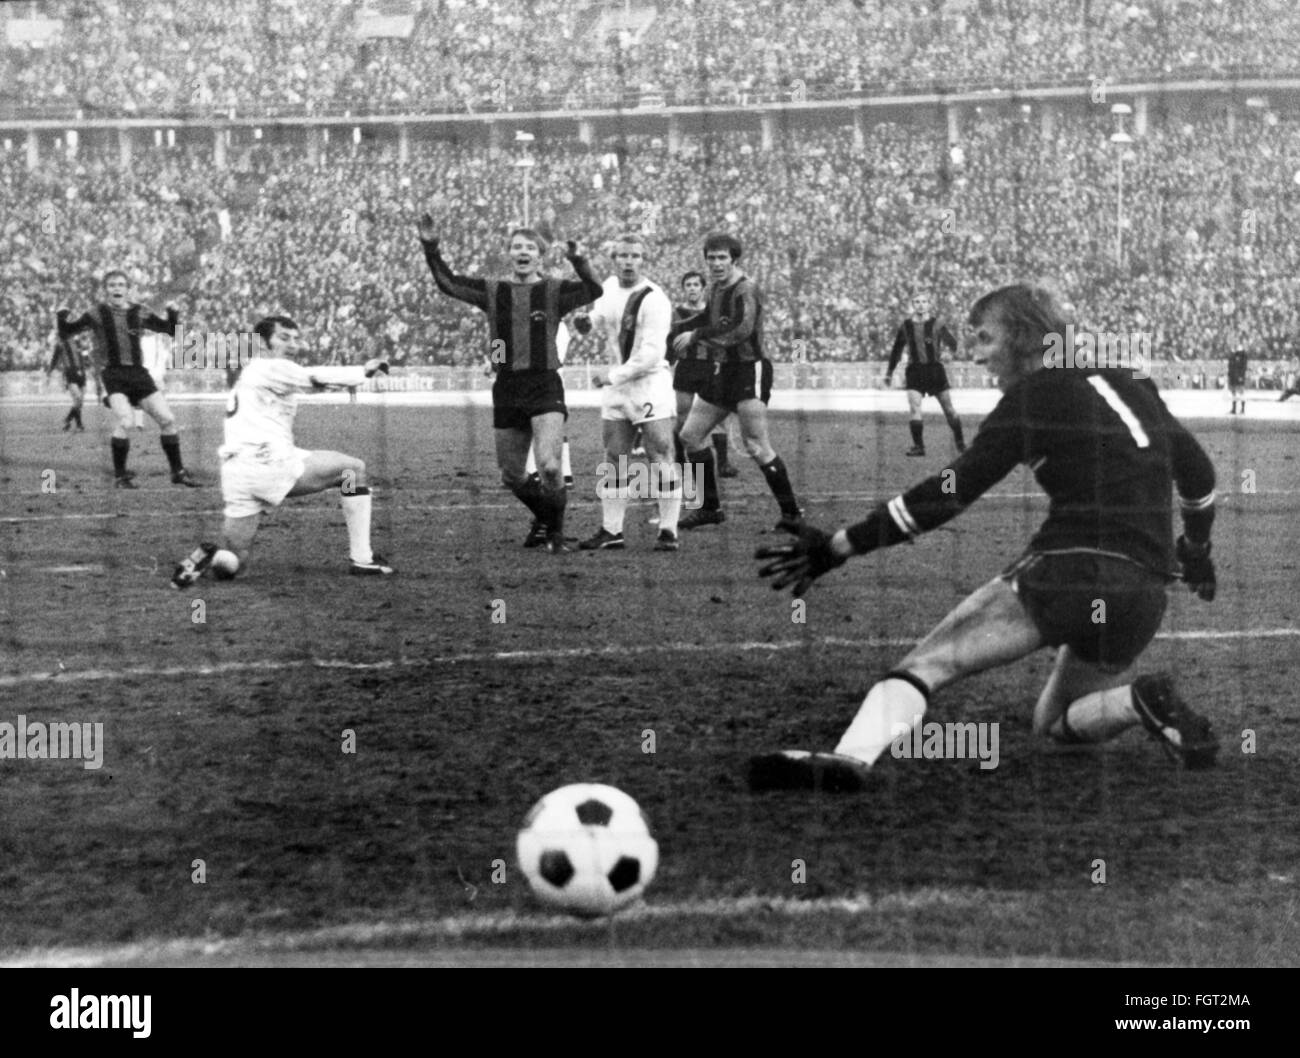 sports,football,games Germany,national league,season 1970 / 1971,14th match day,game Hertha BSC versus Borussia Moenchengladbach(4:2),Olympic stadium,Berlin,7.11.1970,first goal for Herta by Weber,by left: Juergen Weber,Ludwig Mueller,Zoltan Varga,Berti Vogts,Lorenz Horr,Wolfgang Kleff,1:0,nets,goal keeper,goalkeeper,netminder,goalie,goal keepers,goalkeepers,netminders,goalies,keep goal,unsuccessful save,goal net,football match,soccer match,football matches,footballer,footballers,kicker,football player,football players,act,Additional-Rights-Clearences-Not Available Stock Photo